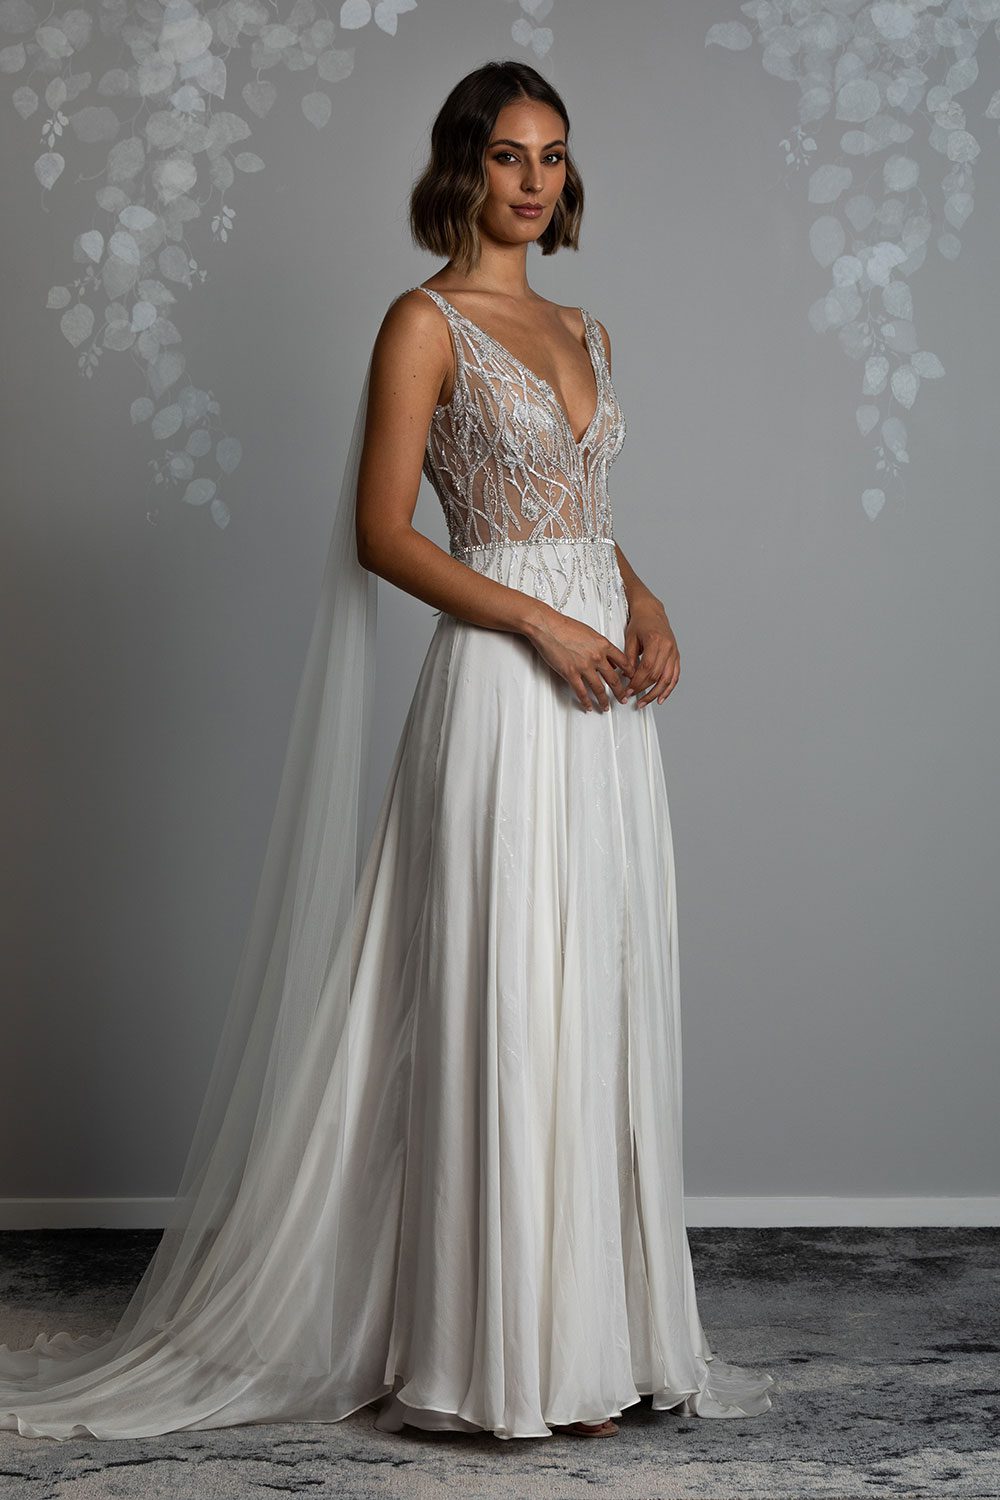 Amaya Wedding Dress from Vinka Design. This stunning gown is made with a sheer, deep v-neckline both front and back, with richly beaded silver lace appliqued throughout the bodice. The bodice is then tied together with an adorning swarovski diamante belt and tulle cape trailing from the shoulder, which can be made detachable. The skirt consists of flowing silver silk chiffon, which opens to reveal lace applique purposefully placed at the front of the skirt. Semi profile view of model with sheer deep V-neckline and flowing silver silk chiffon skirt and tulle cape